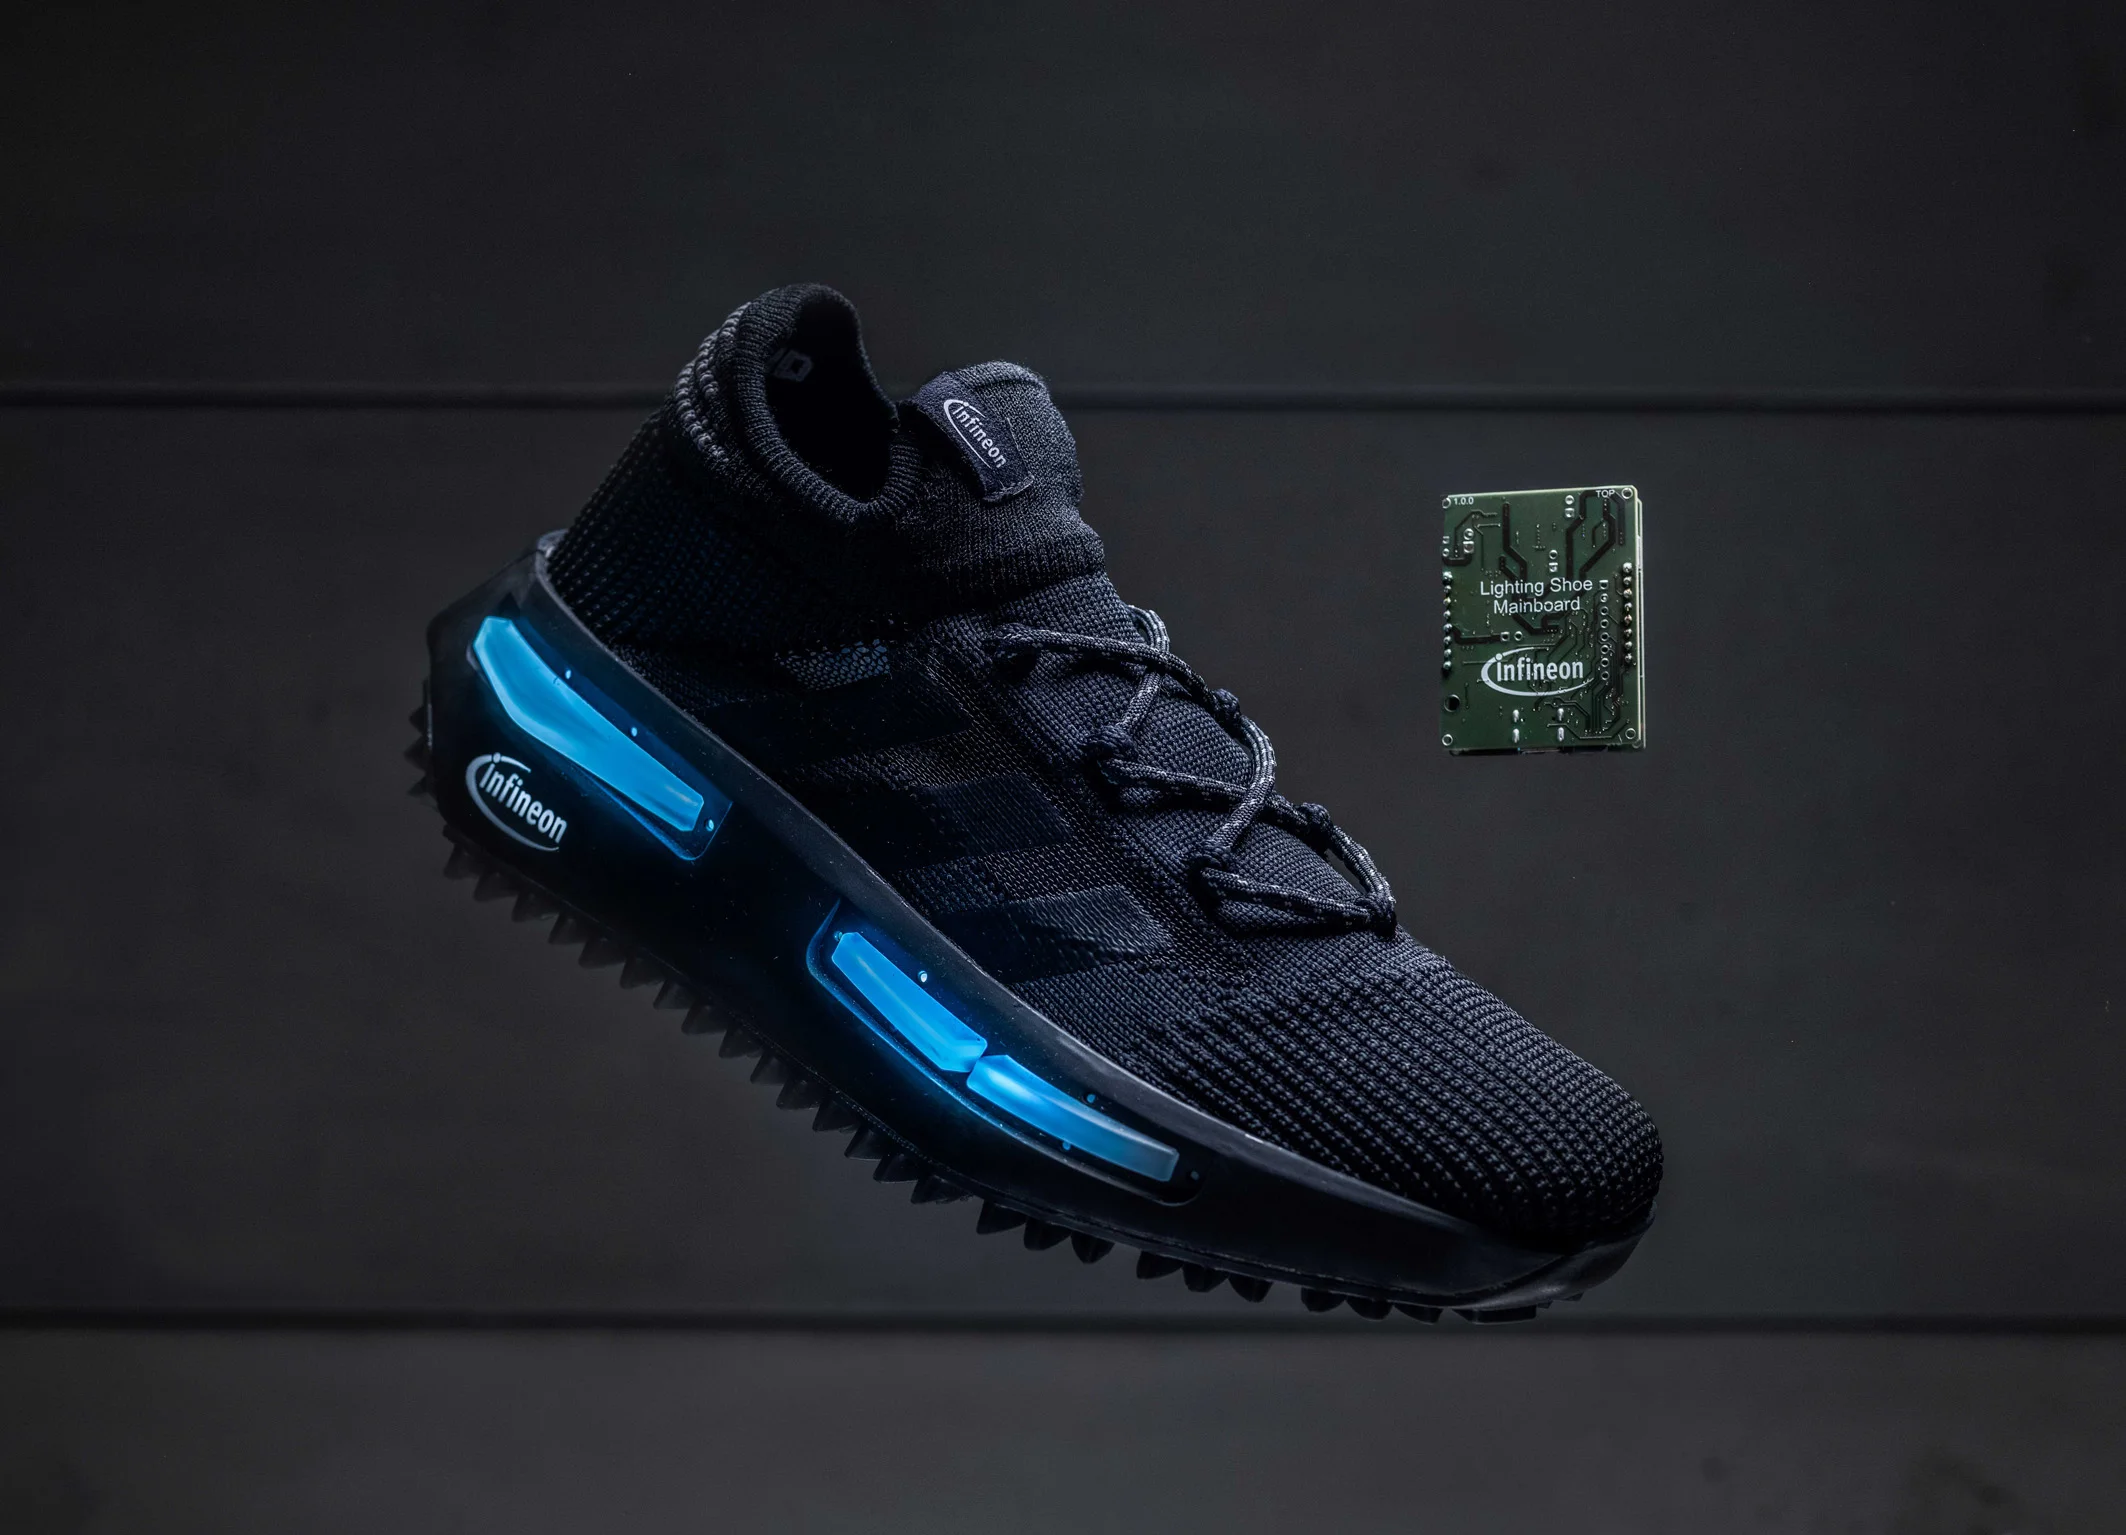 Infineon Technologies and Adidas will release luminous sneakers